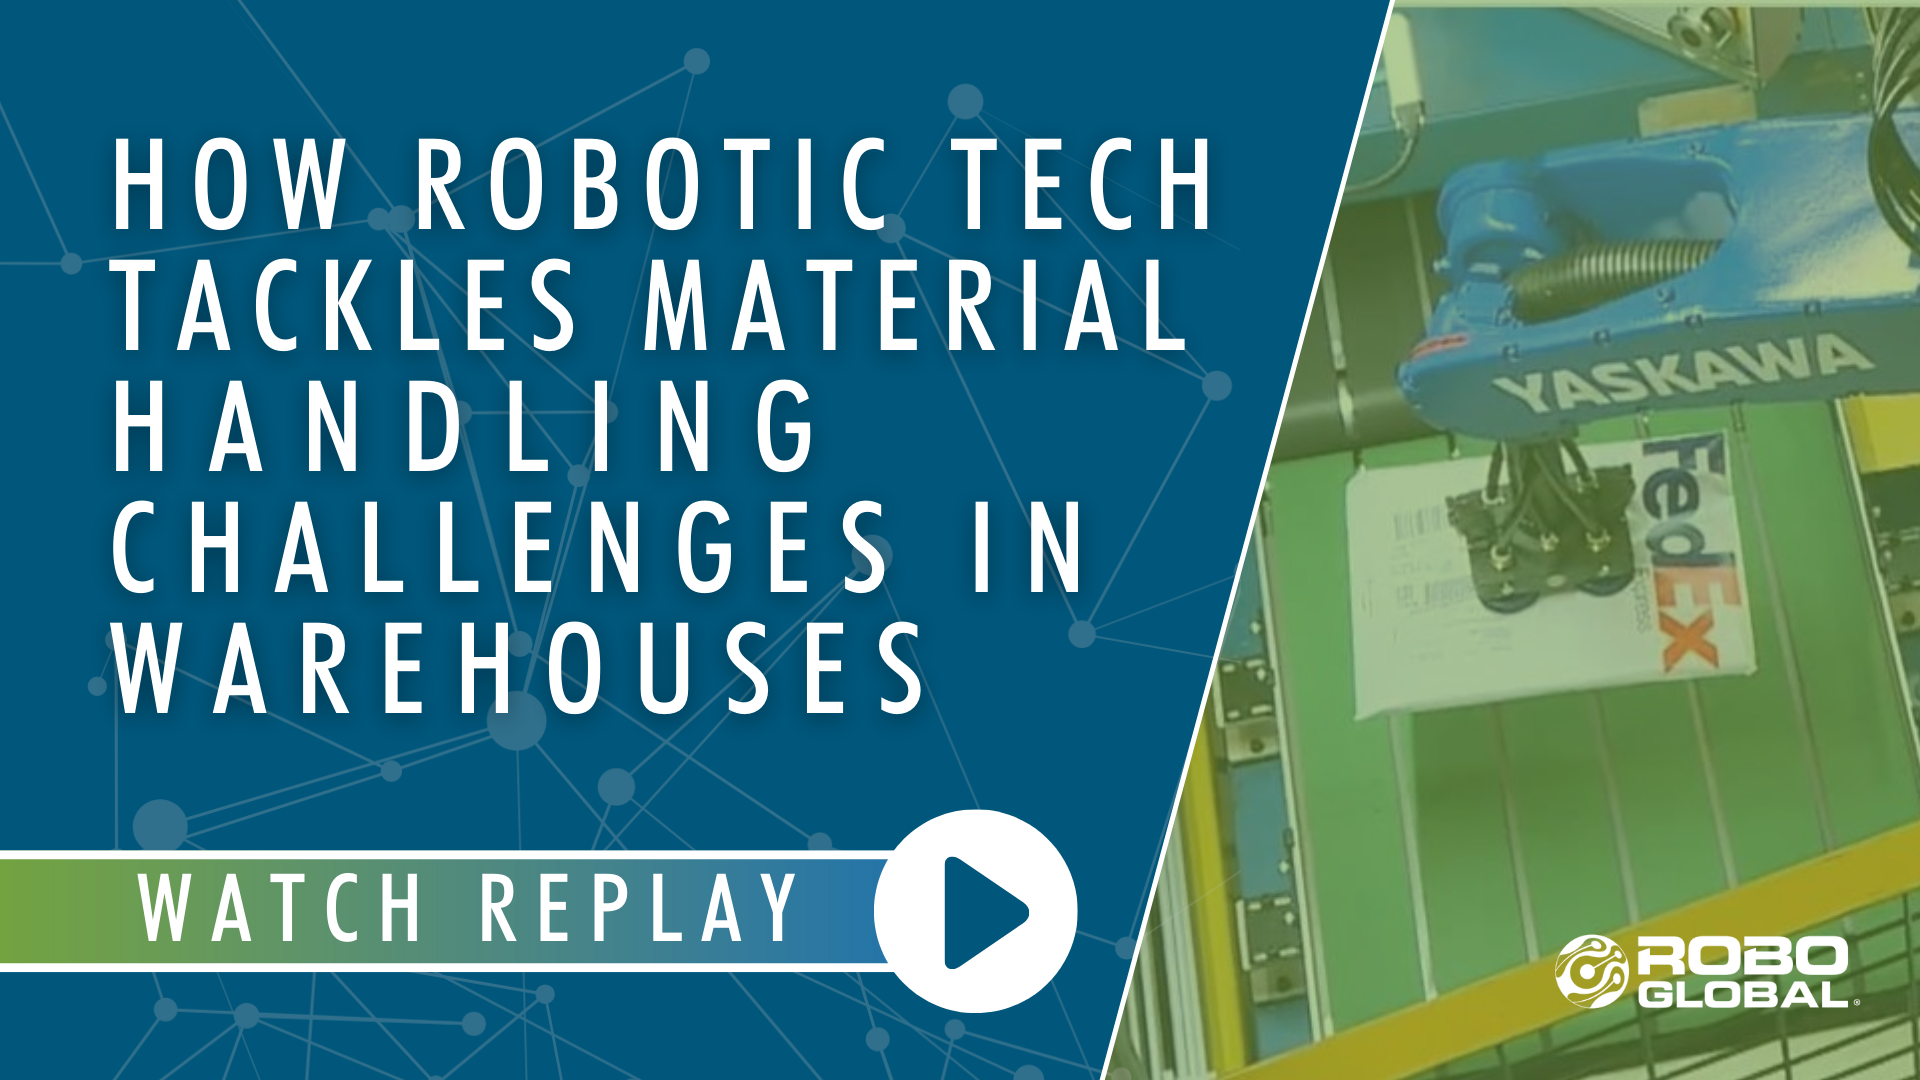 How Robotic Technologies Tackle Material Handling Challenges in Warehouses